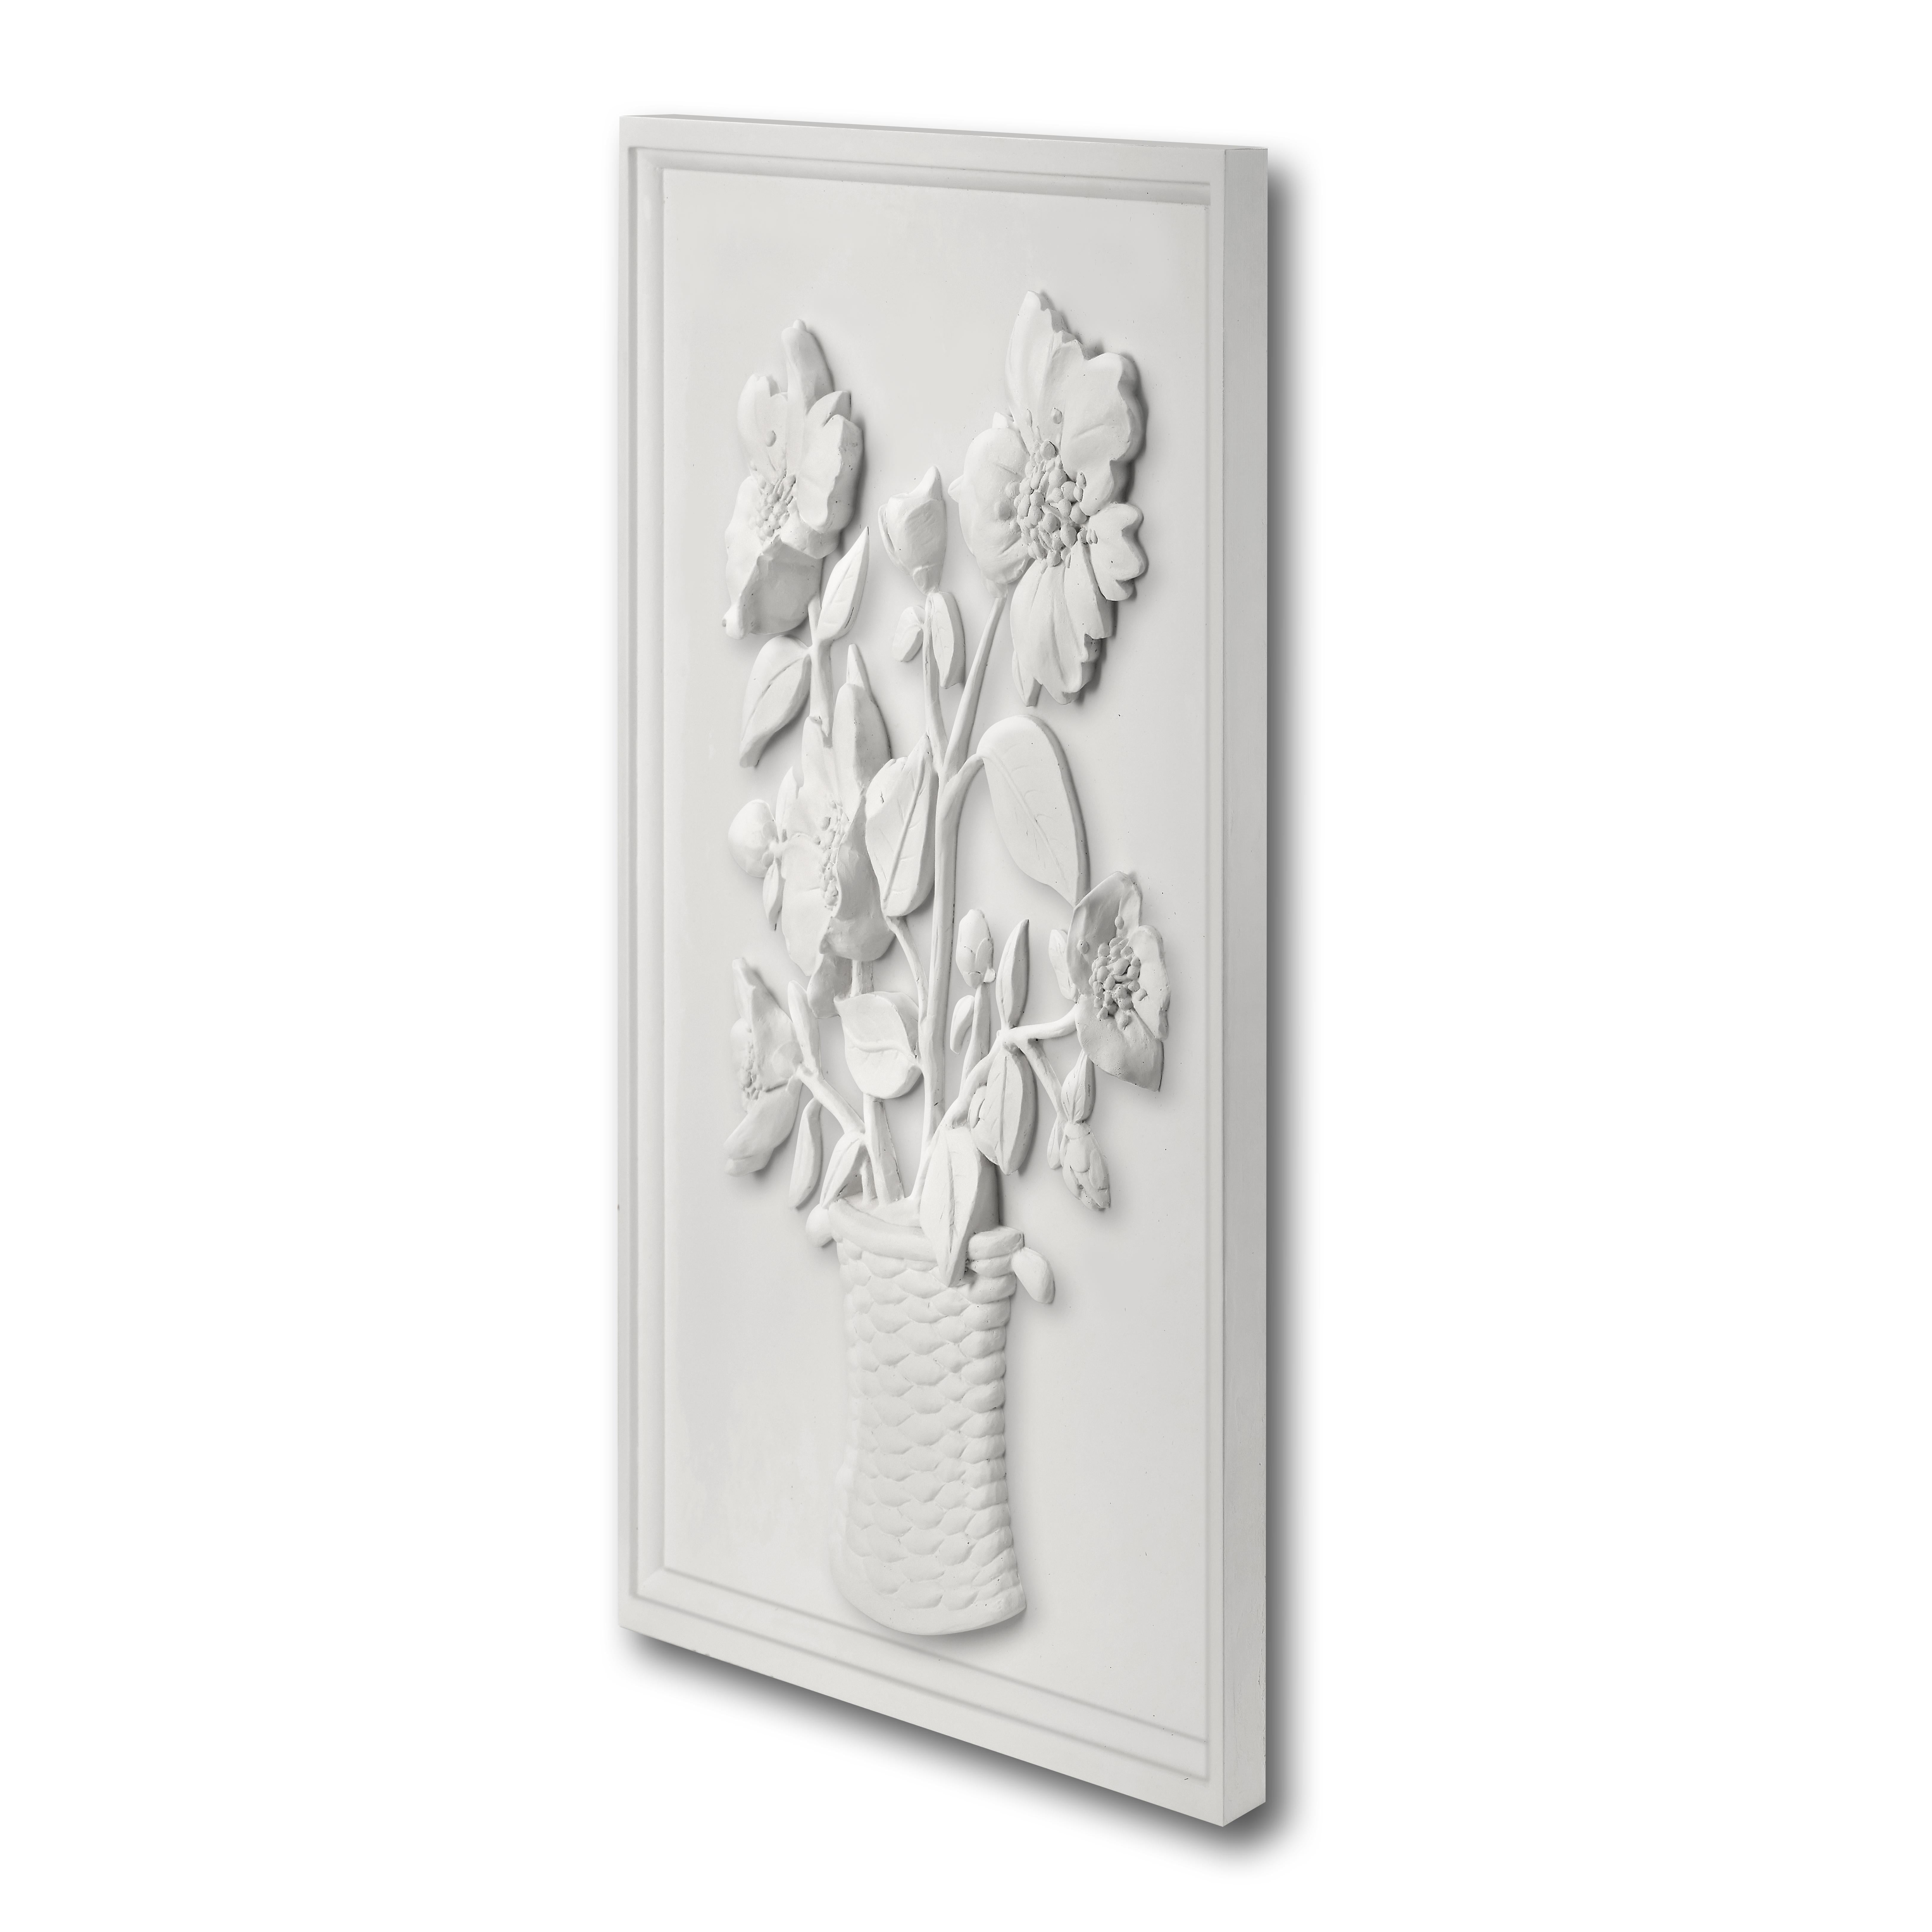 A woven cachepot holding an effervescent group of poppies is the focus of this 18” x 18” relief plaster panel, cast in New York, and perfectly scaled to be used alone or as part of wall group with our other plaster panels.  Handcrafted in the USA. 